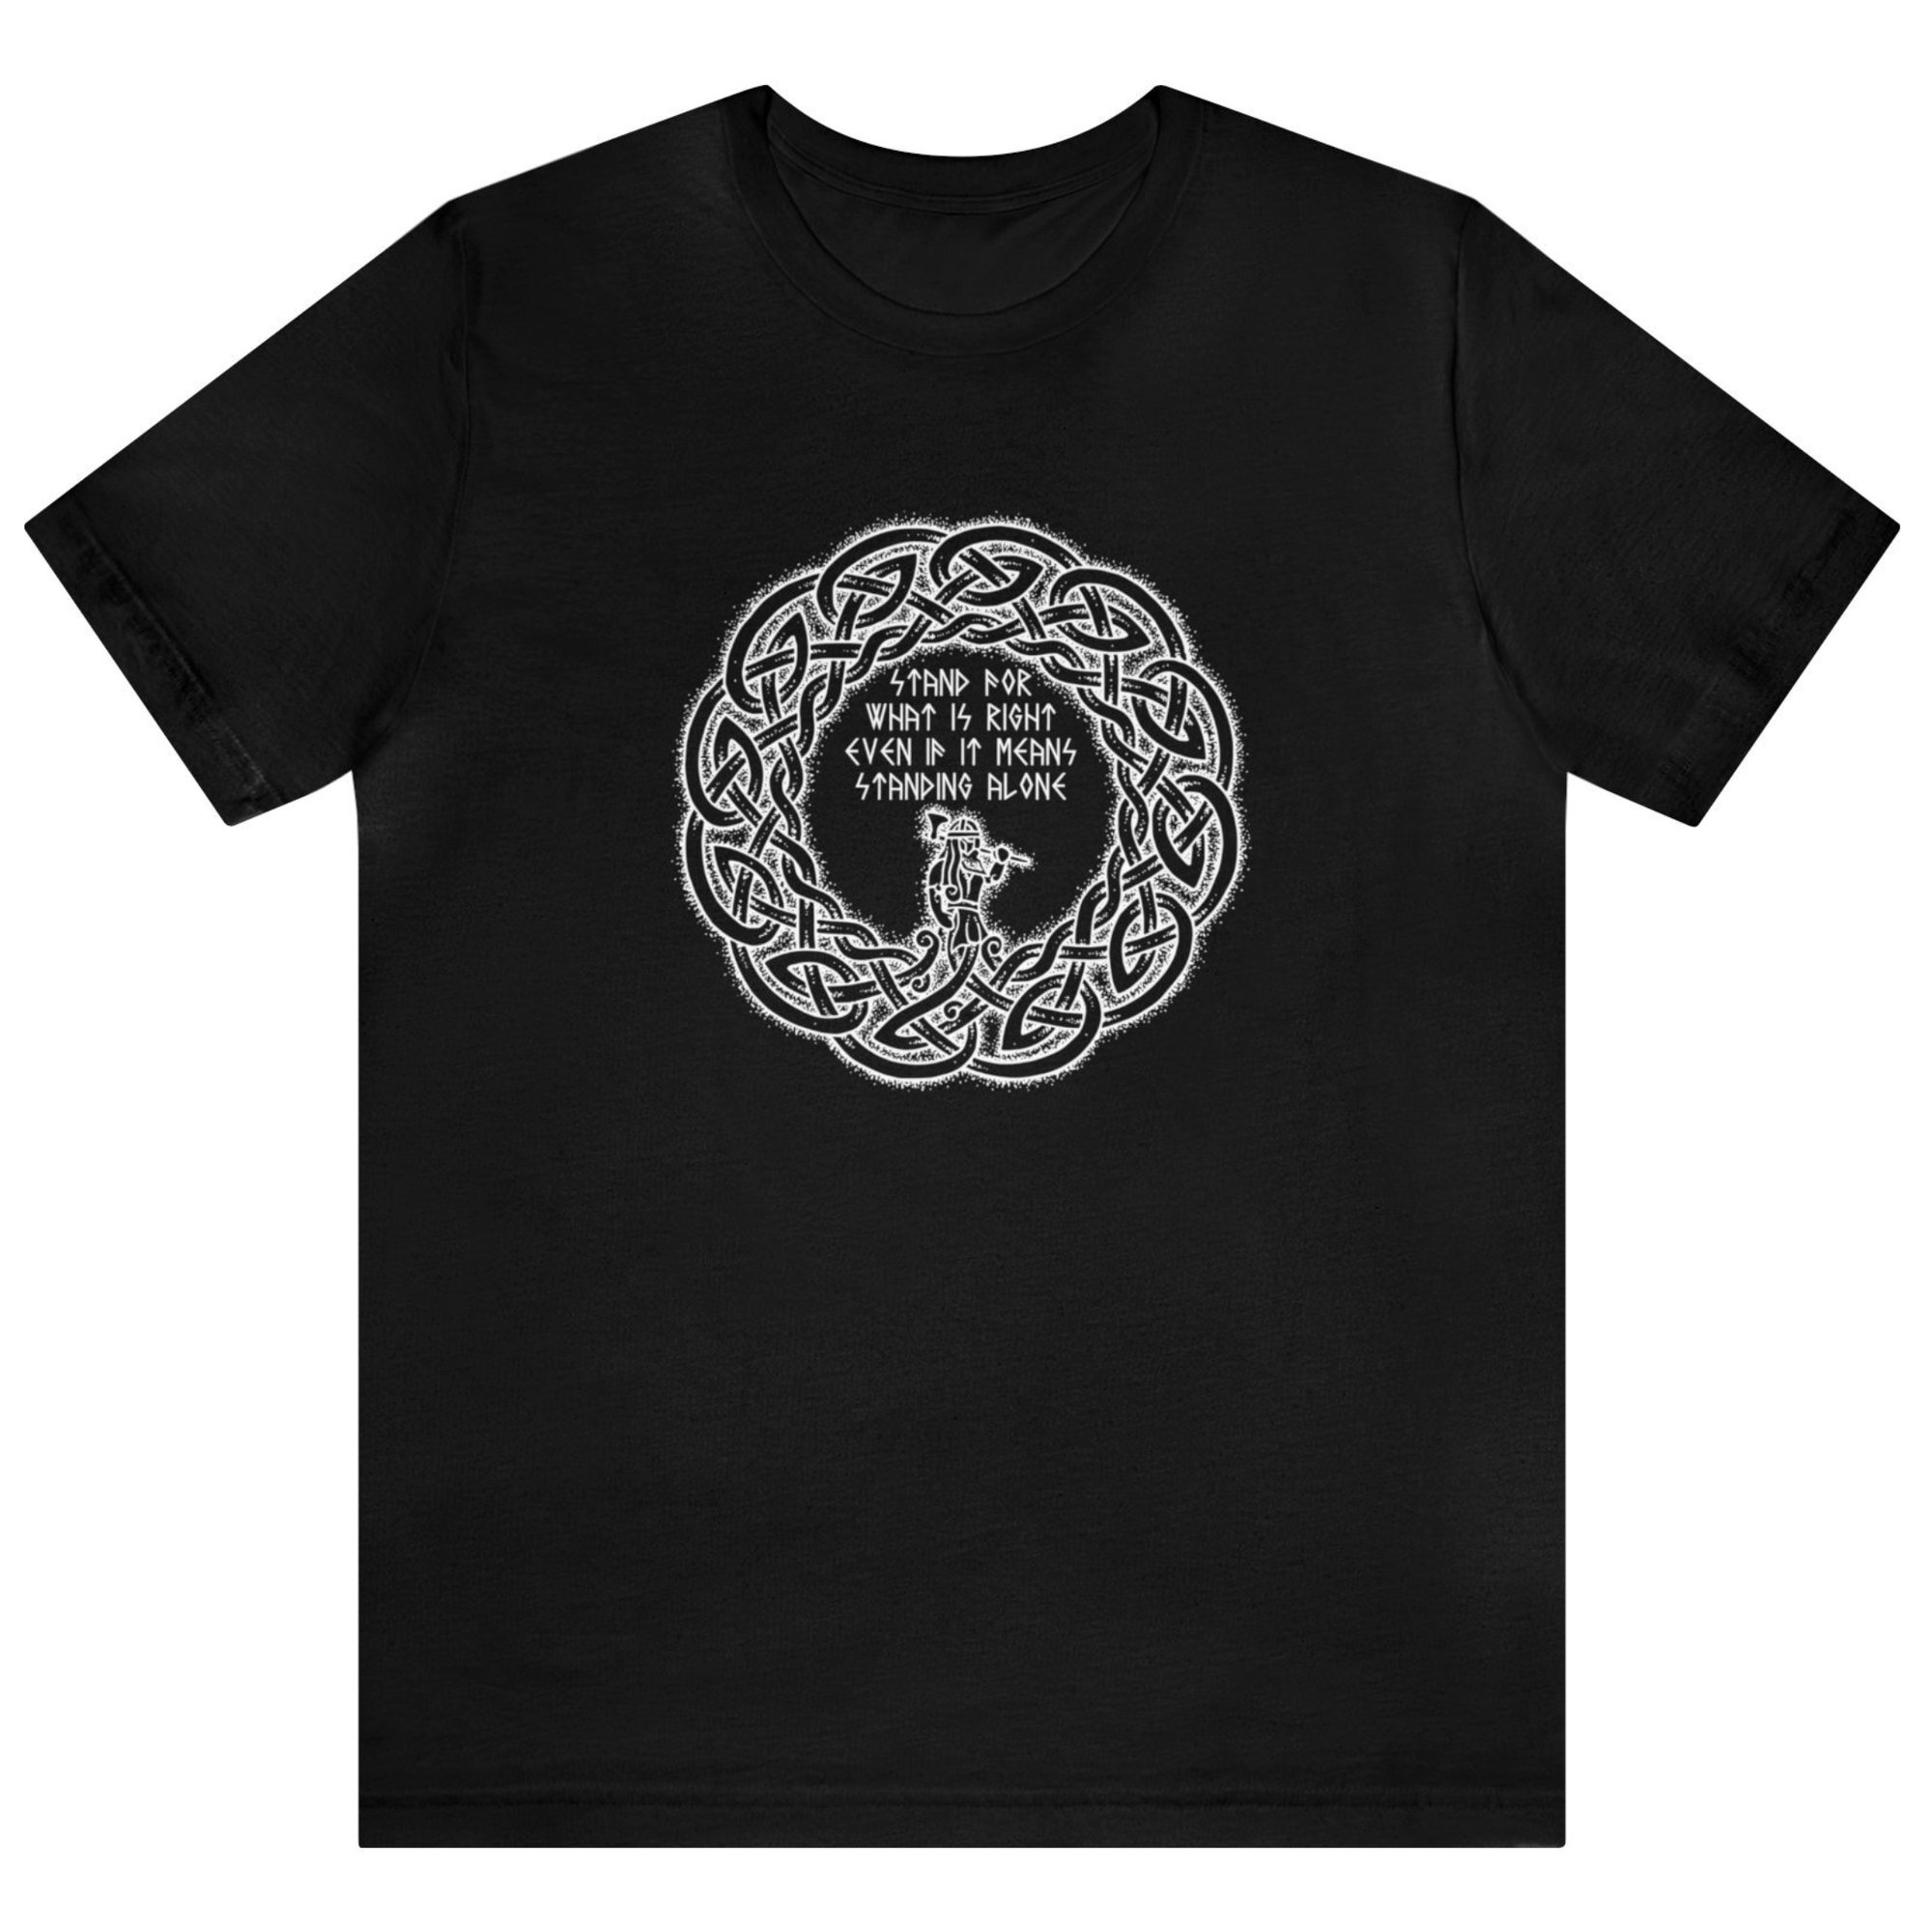 T-Shirt Stand for What is Right Viking T-Shirt Ancient Treasures Ancientreasures Viking Odin Thor Mjolnir Celtic Norse Norse Mythology